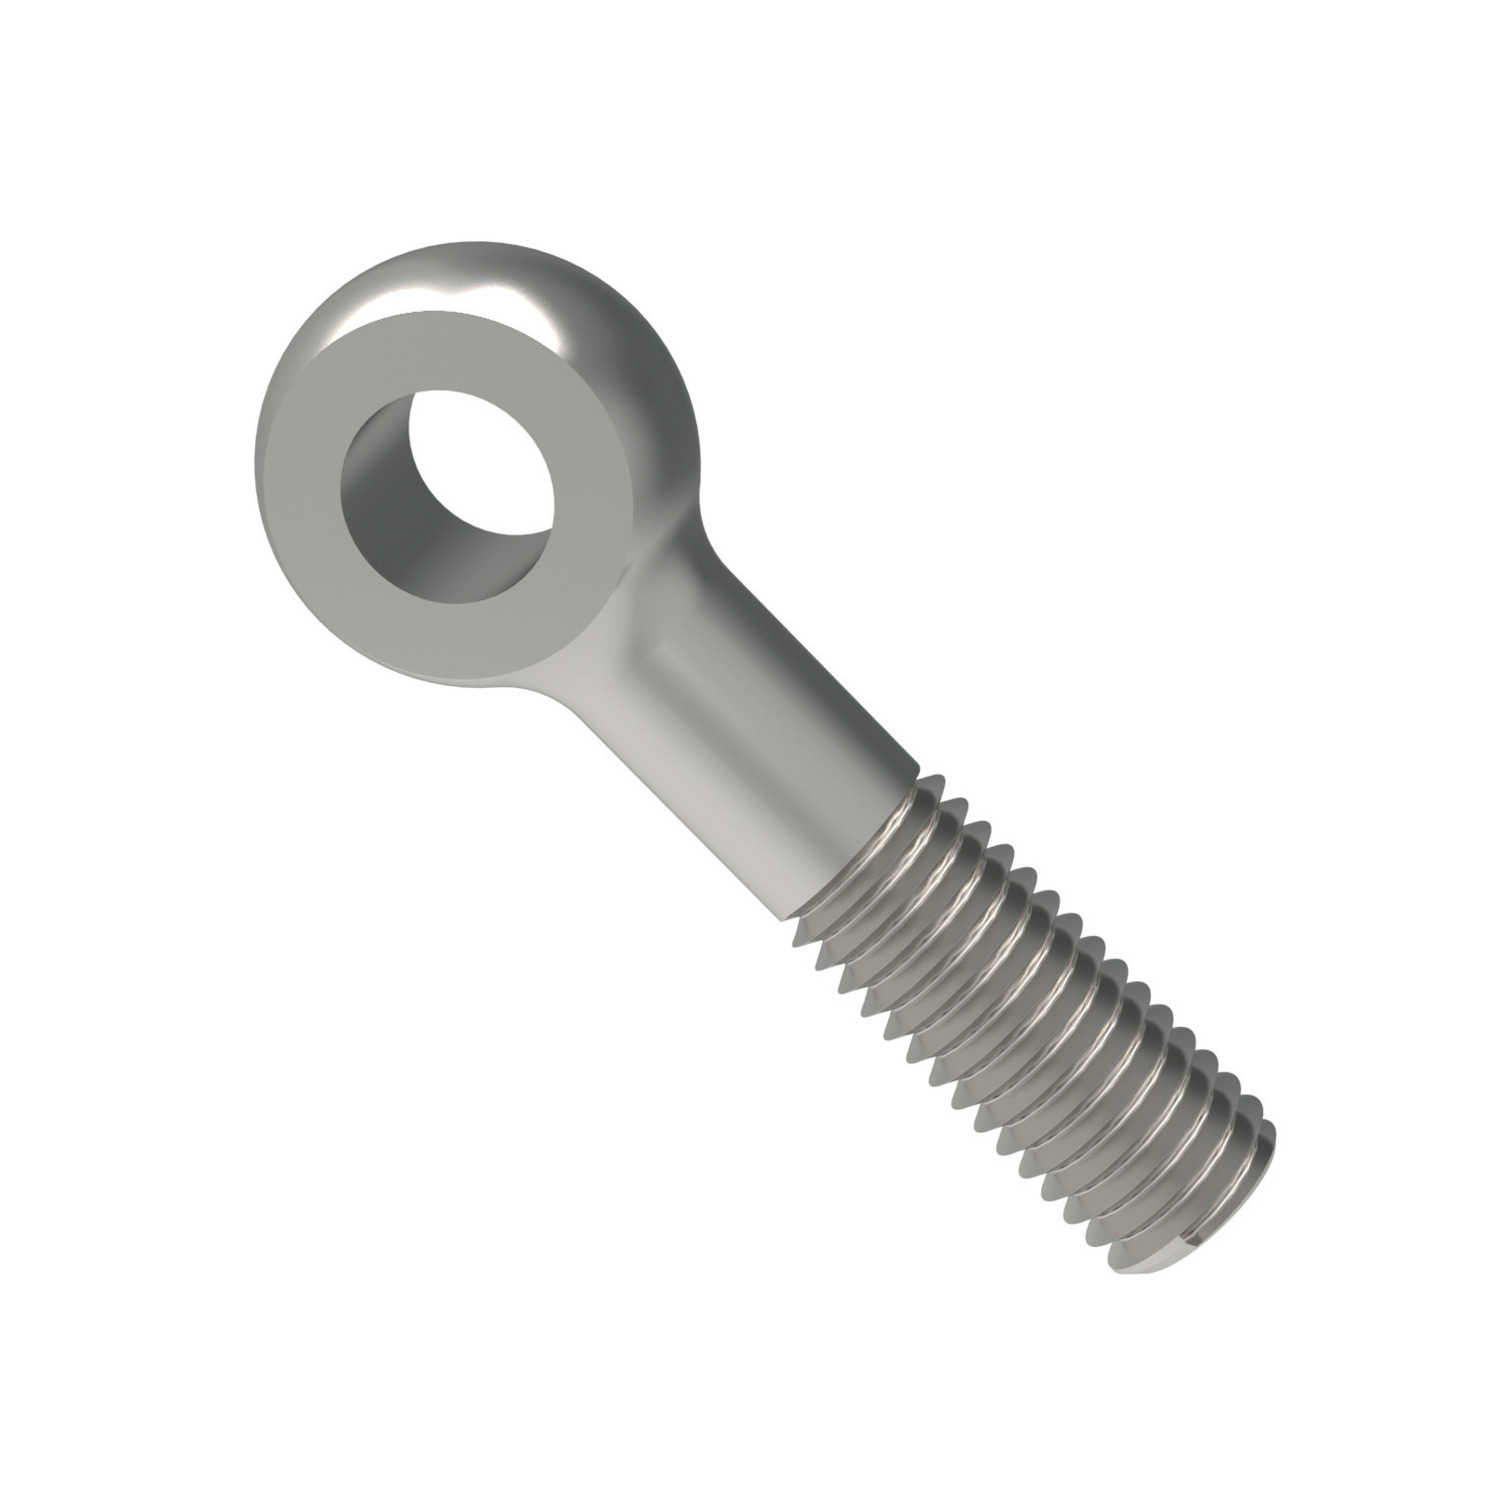 Swing Bolts Stainless steel A2. Swing bolts are manufactured to DIN 444 B